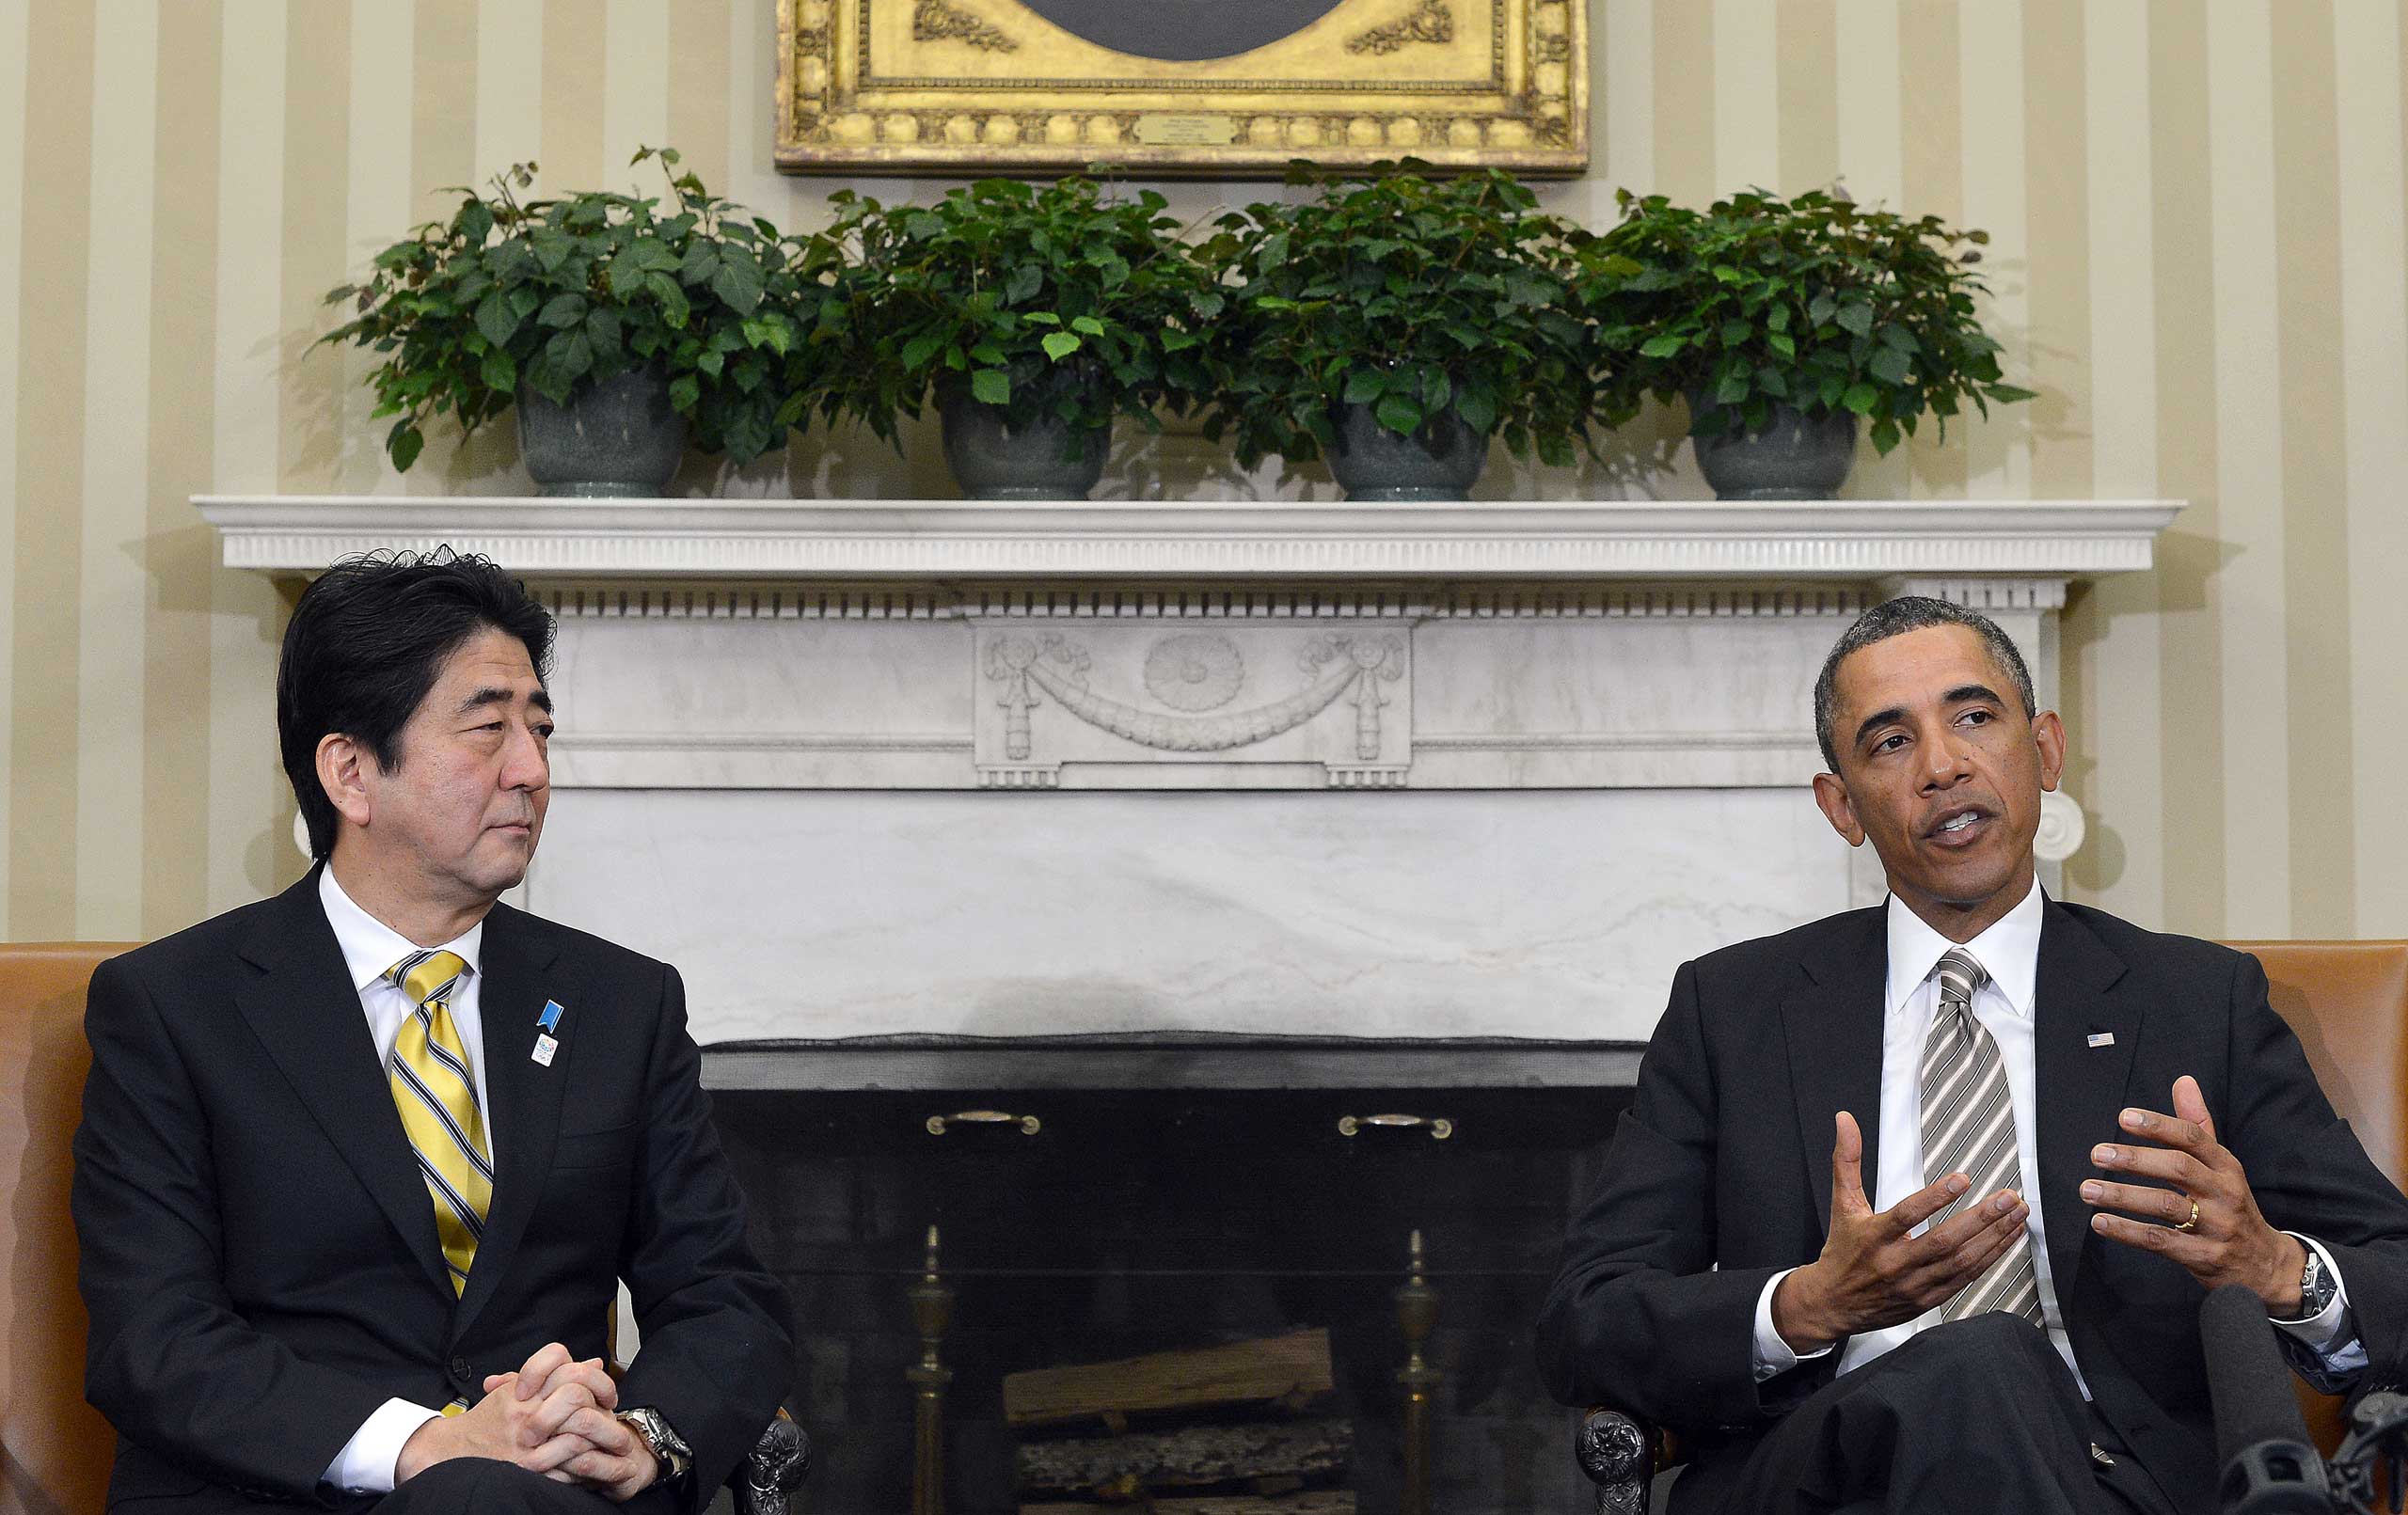 US President Barack Obama speaks while Japan's new conservative Prime Minister Shinzo Abe listens, following their bilateral meeting in the Oval Office at the White House in Washington, DC, on Feb. 22, 2013. (Jewel Samad—AFP/Getty Images)